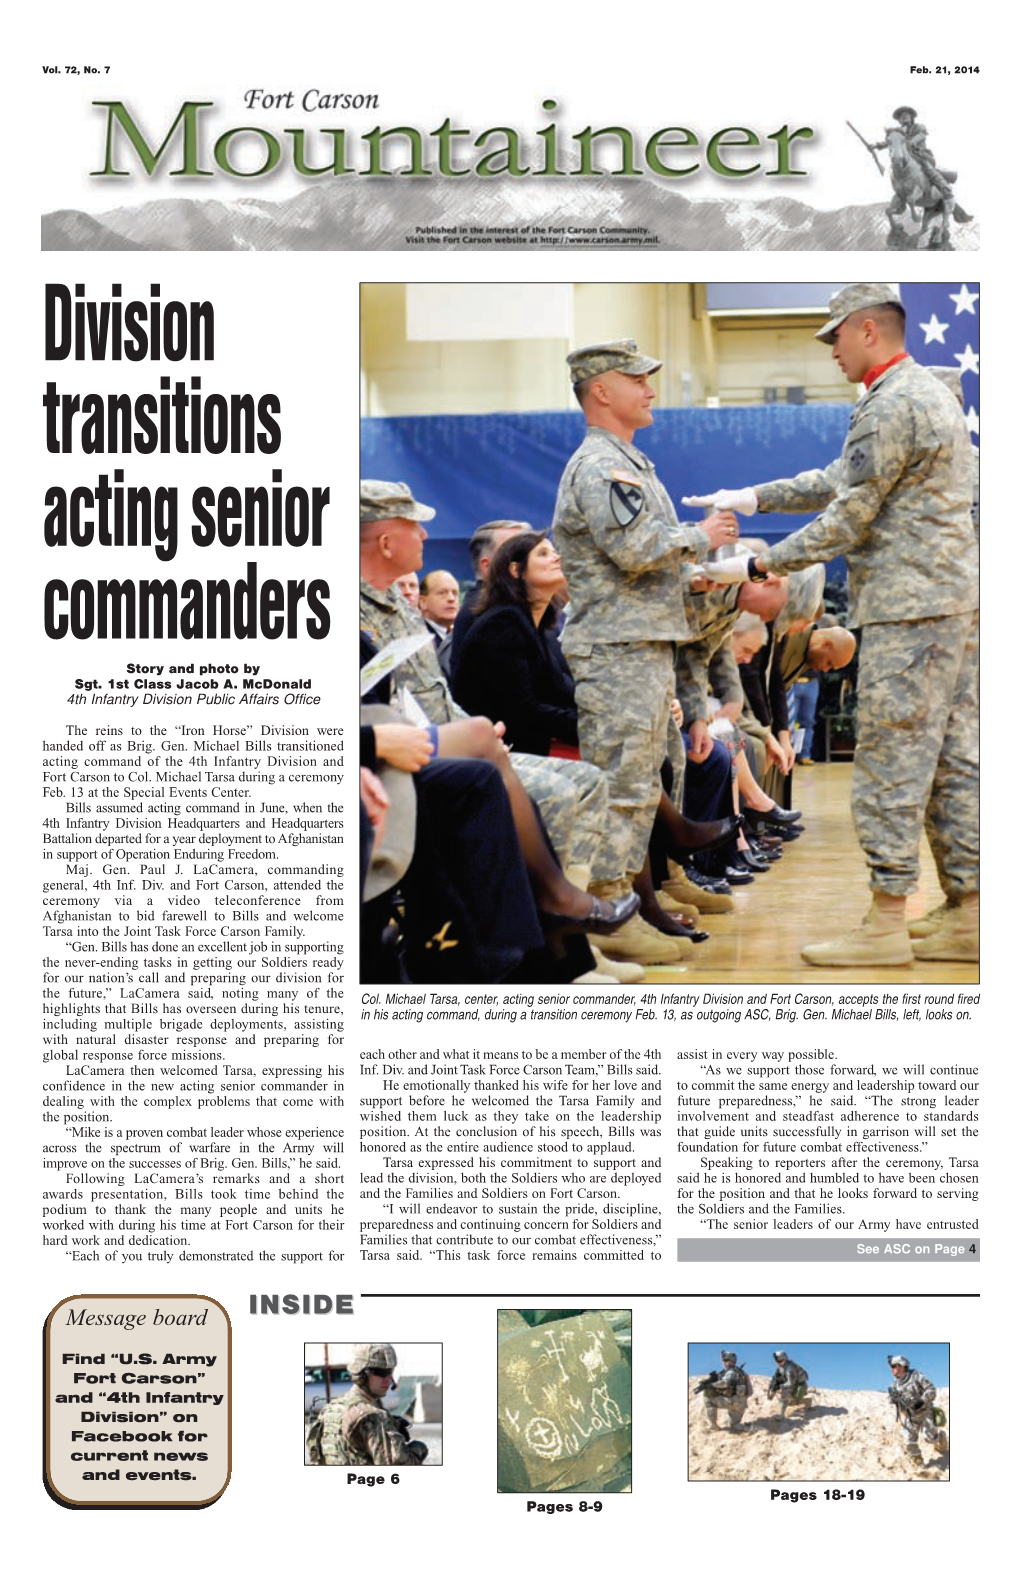 02-21-14 -- 01 Front-News Layout 1